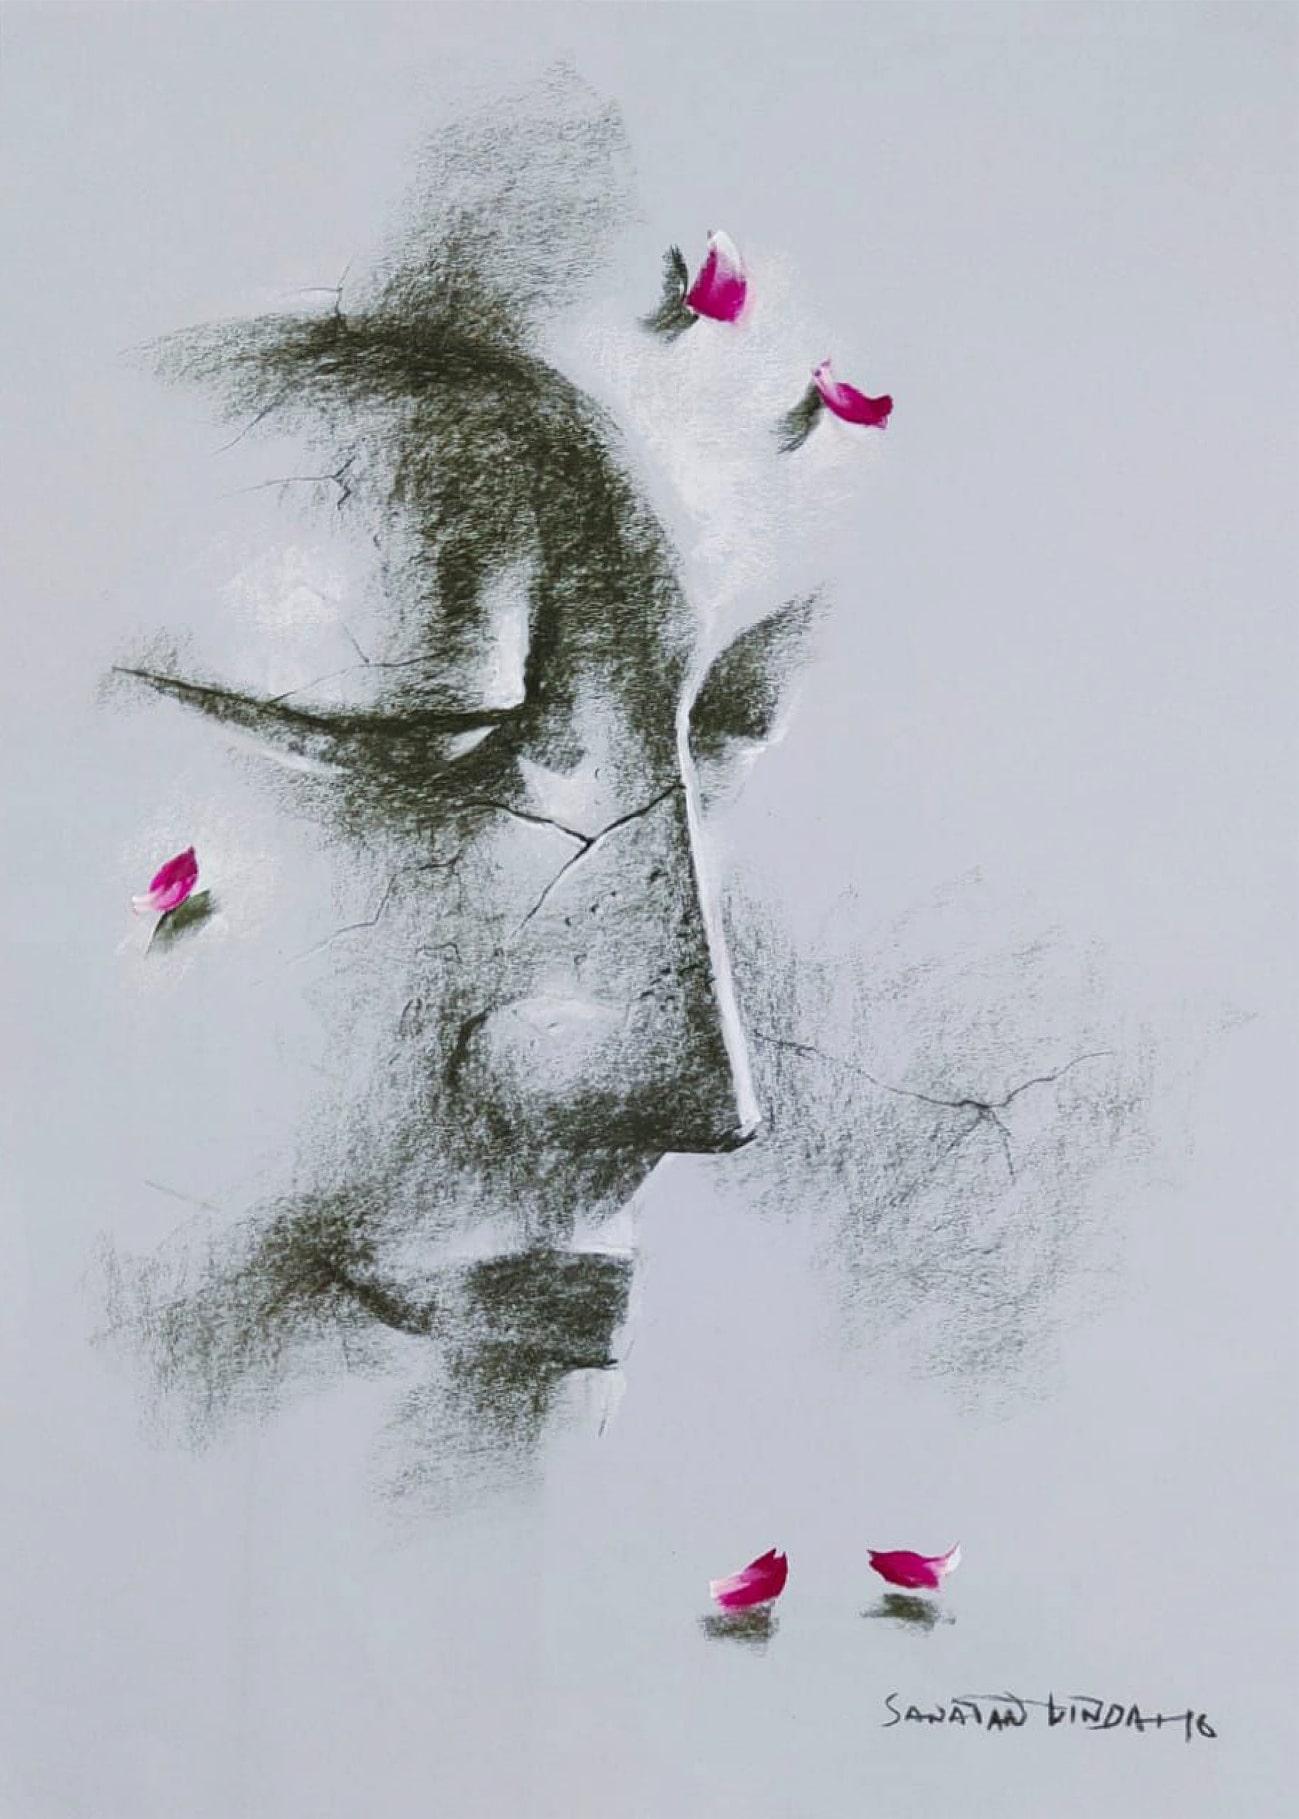 Yugpurush, Buddha, Conte & Dry Pastel on Paper, by Indian Artist "In Stock"